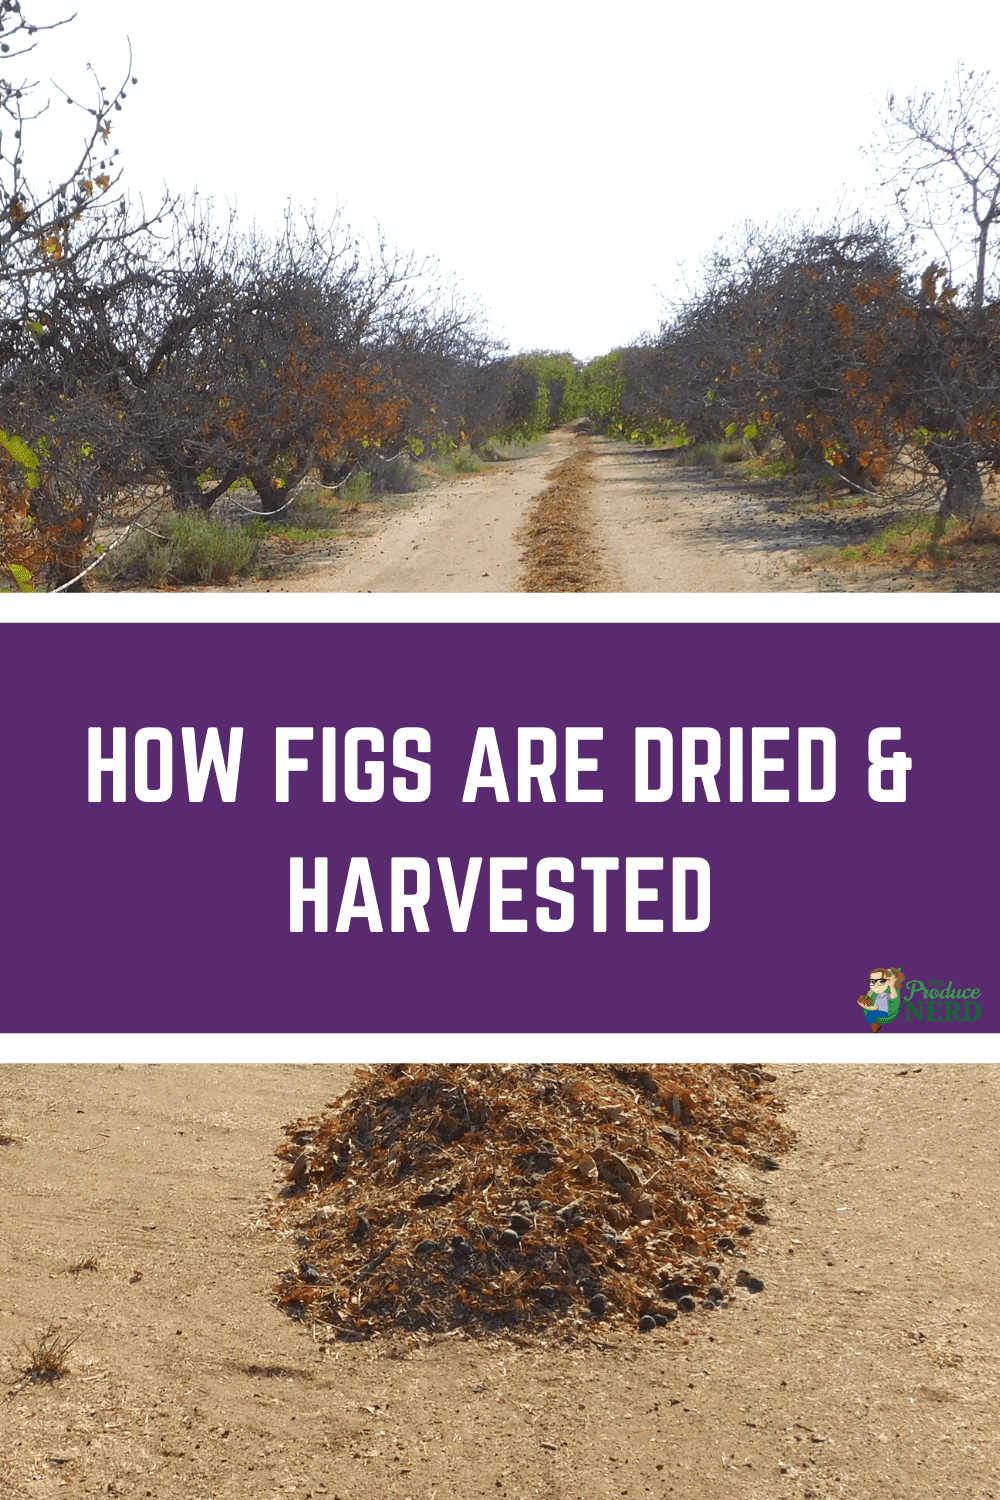 You are currently viewing How Figs are Dried, Harvested & Packed in California